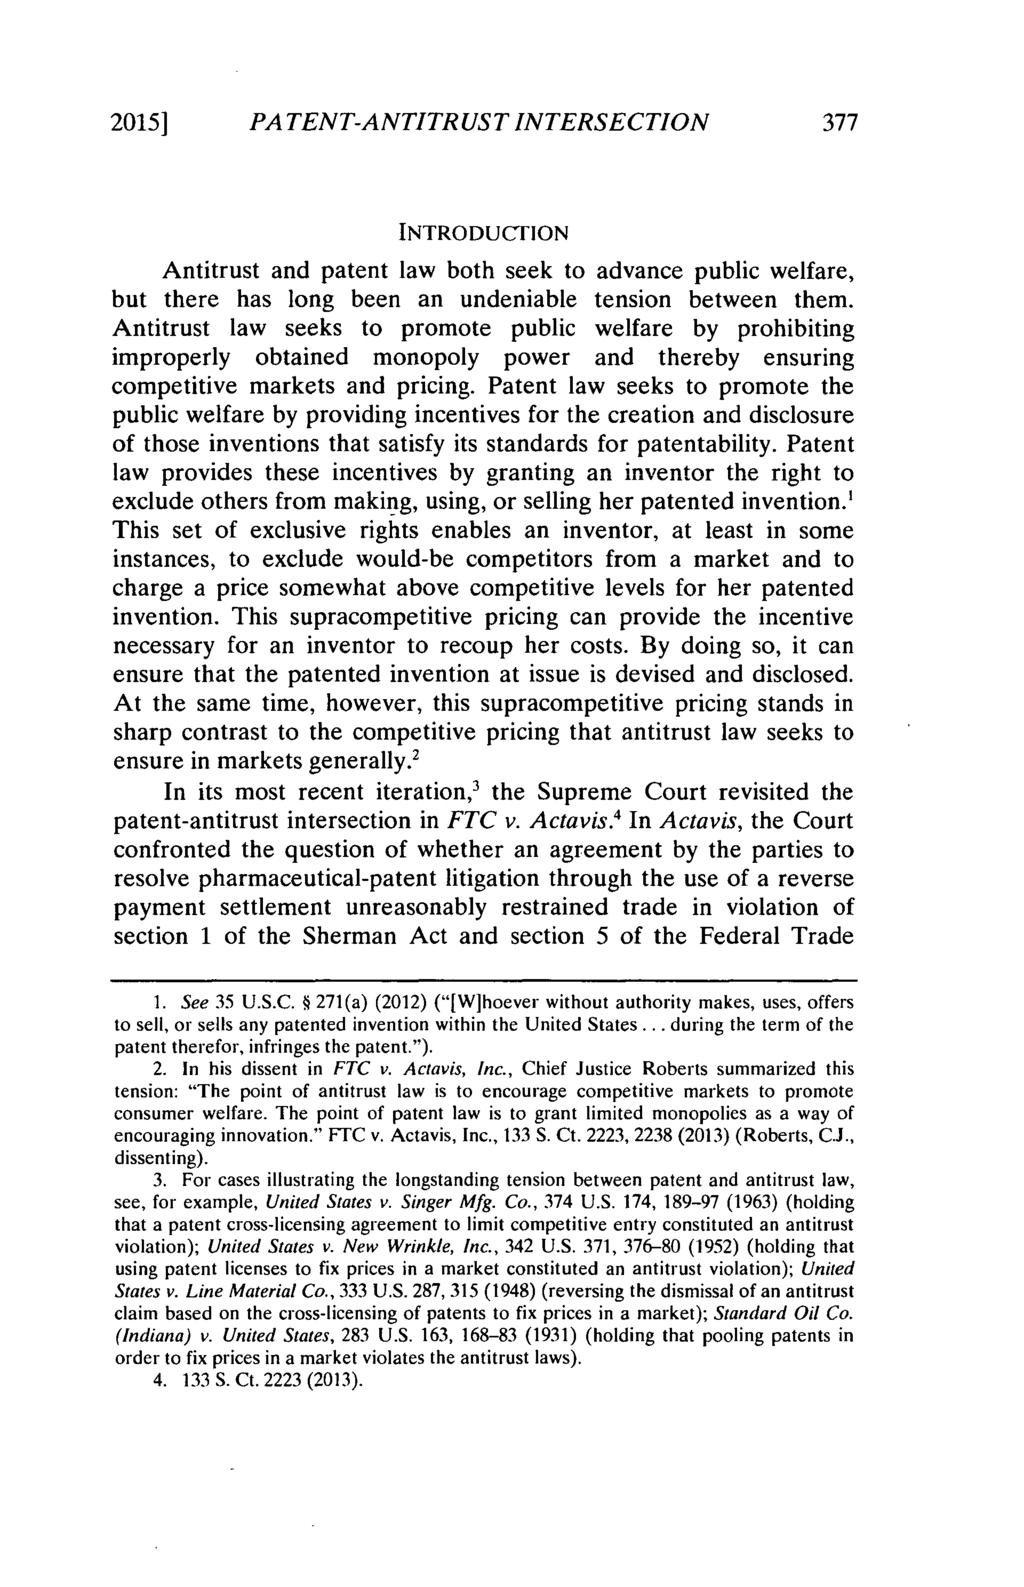 2015] PA TENT-ANTITRUST INTERSECTION INTRODUCTION Antitrust and patent law both seek to advance public welfare, but there has long been an undeniable tension between them.